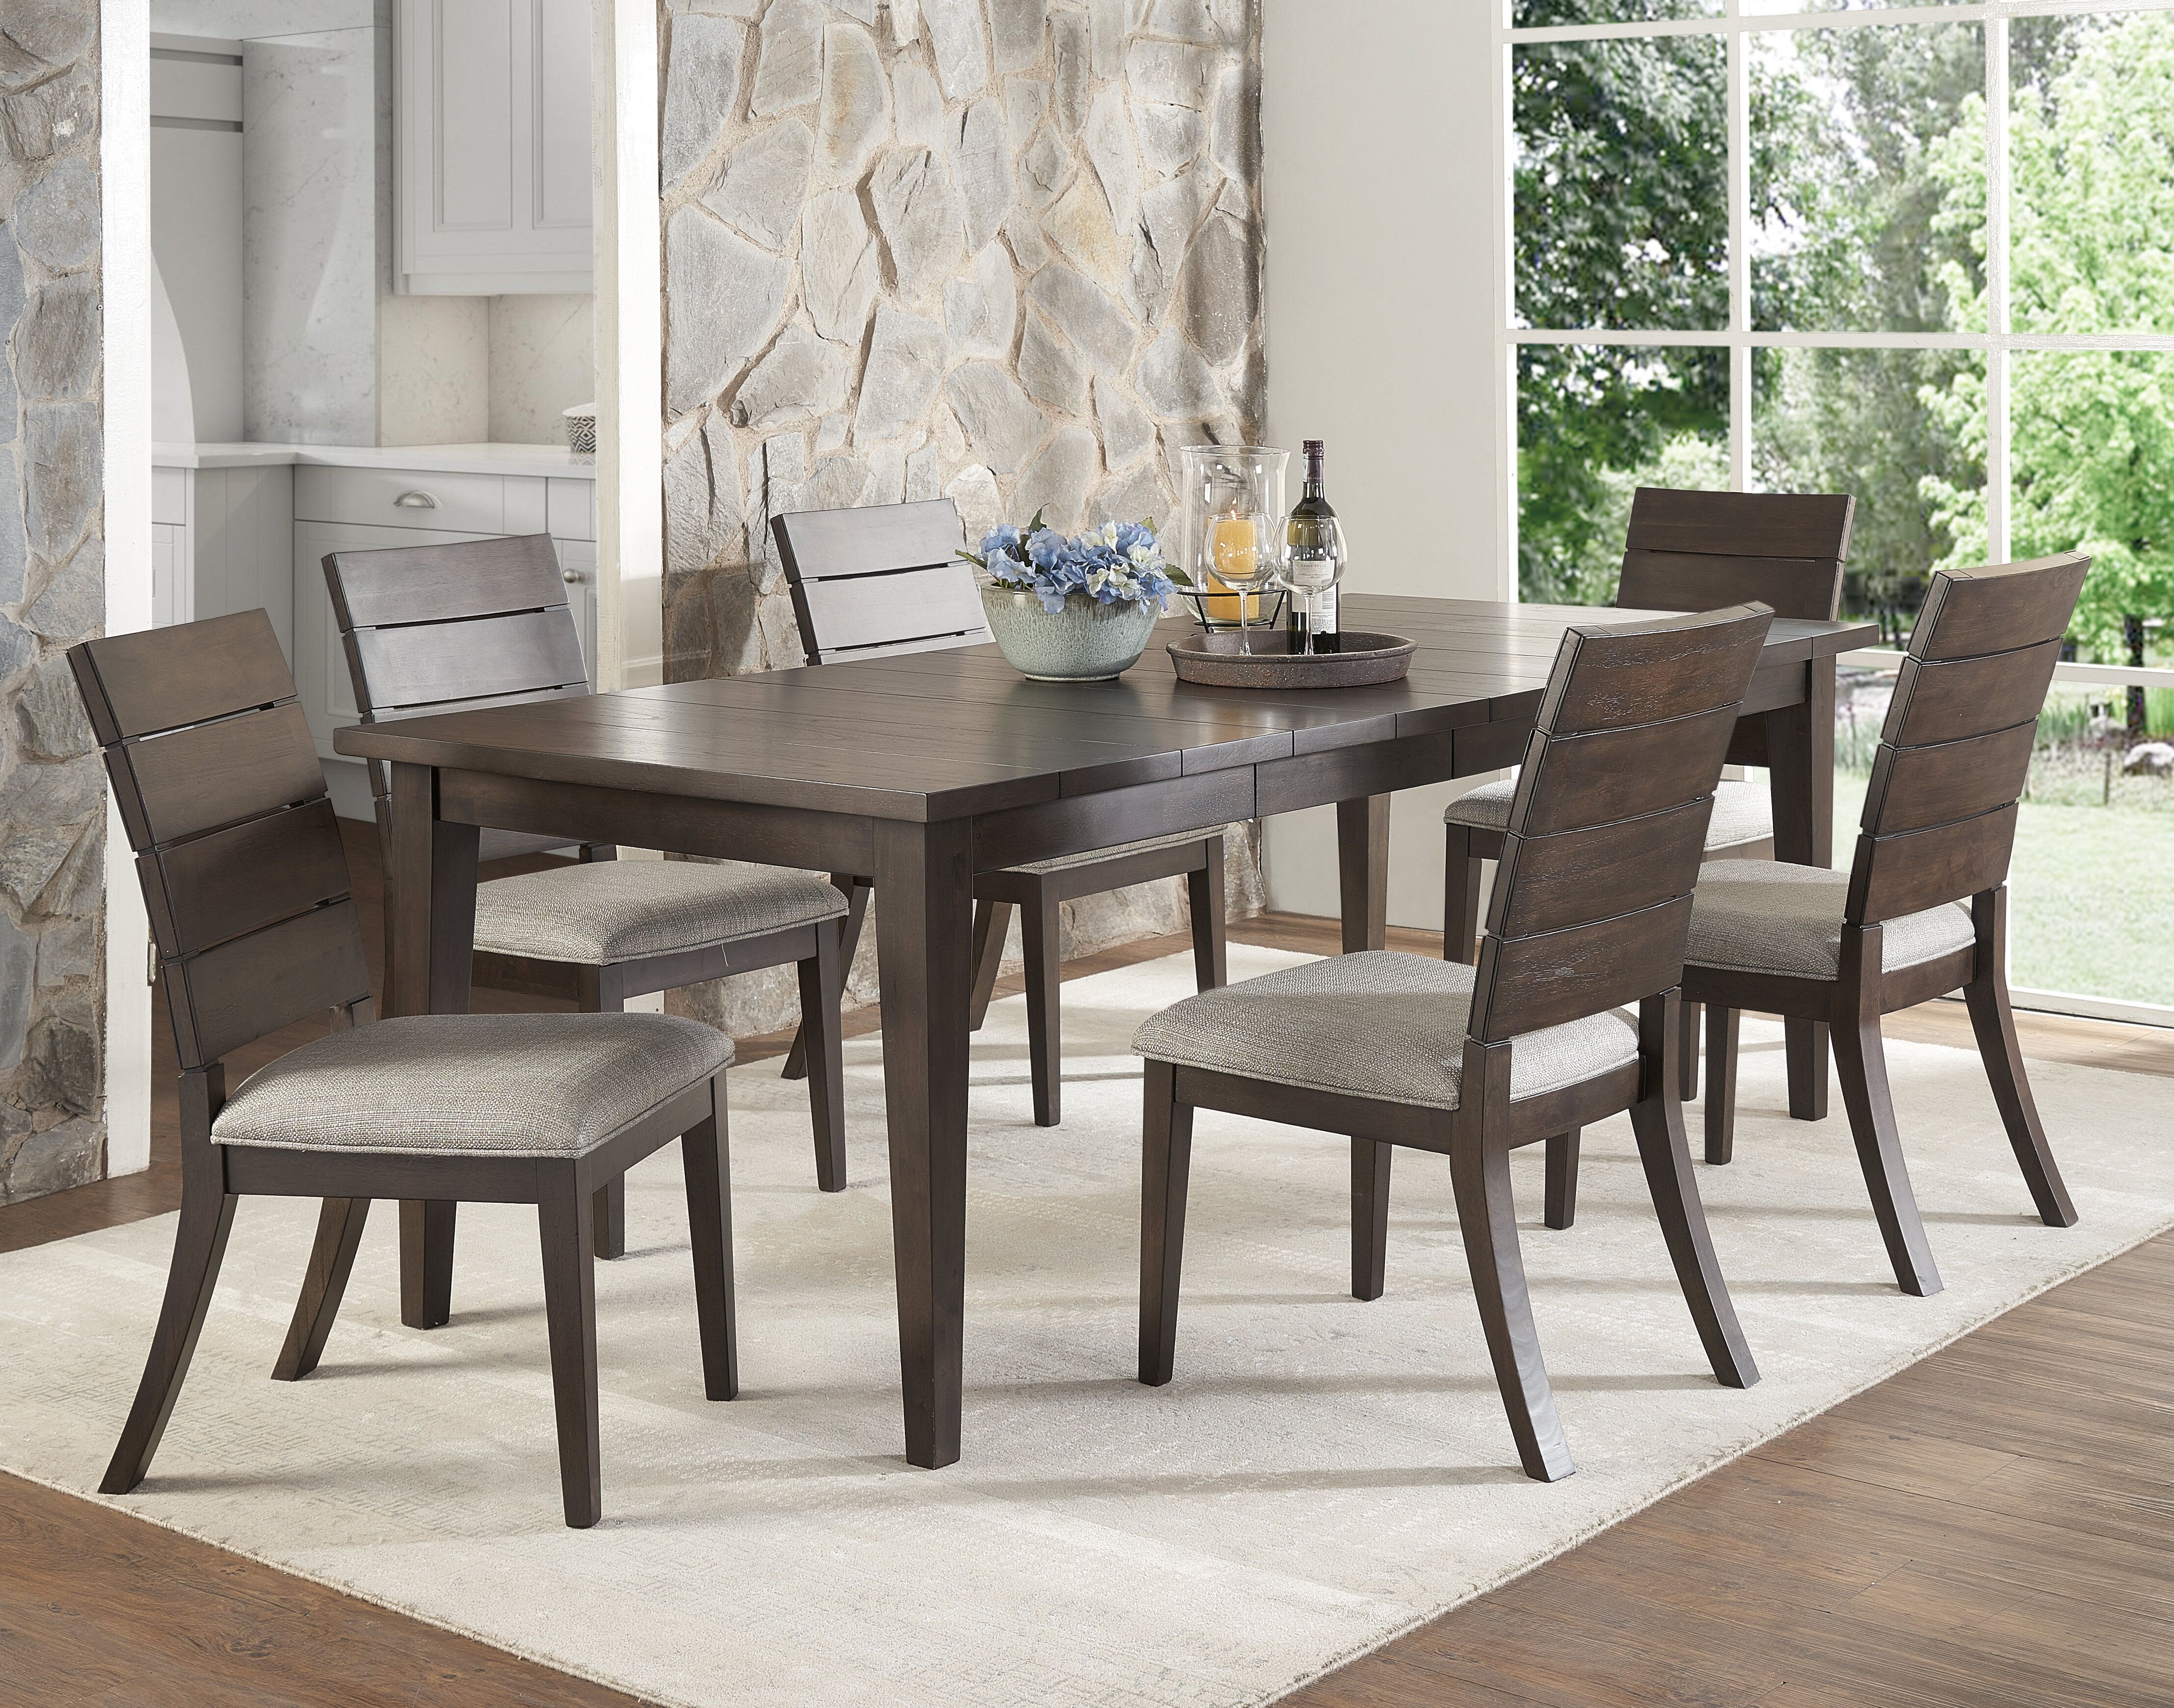 Wooton 7 Piece Extendable Dining Set Pertaining To 2018 Hanska Wooden 5 Piece Counter Height Dining Table Sets (Set Of 5) (View 4 of 20)